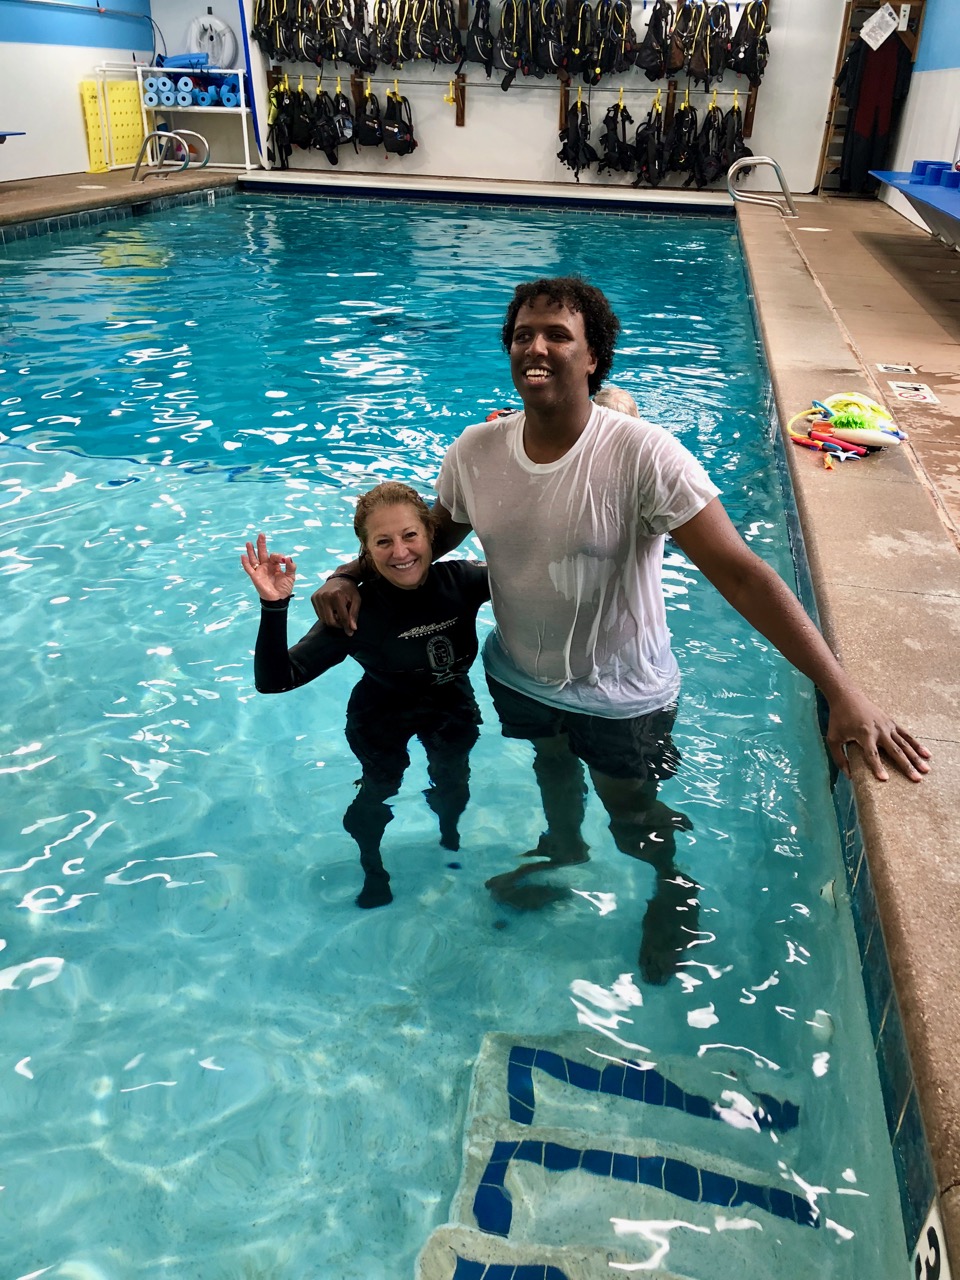 A tall young man in t-shirt stands with his petite, wet-suited instructor in the shallow end of the pool